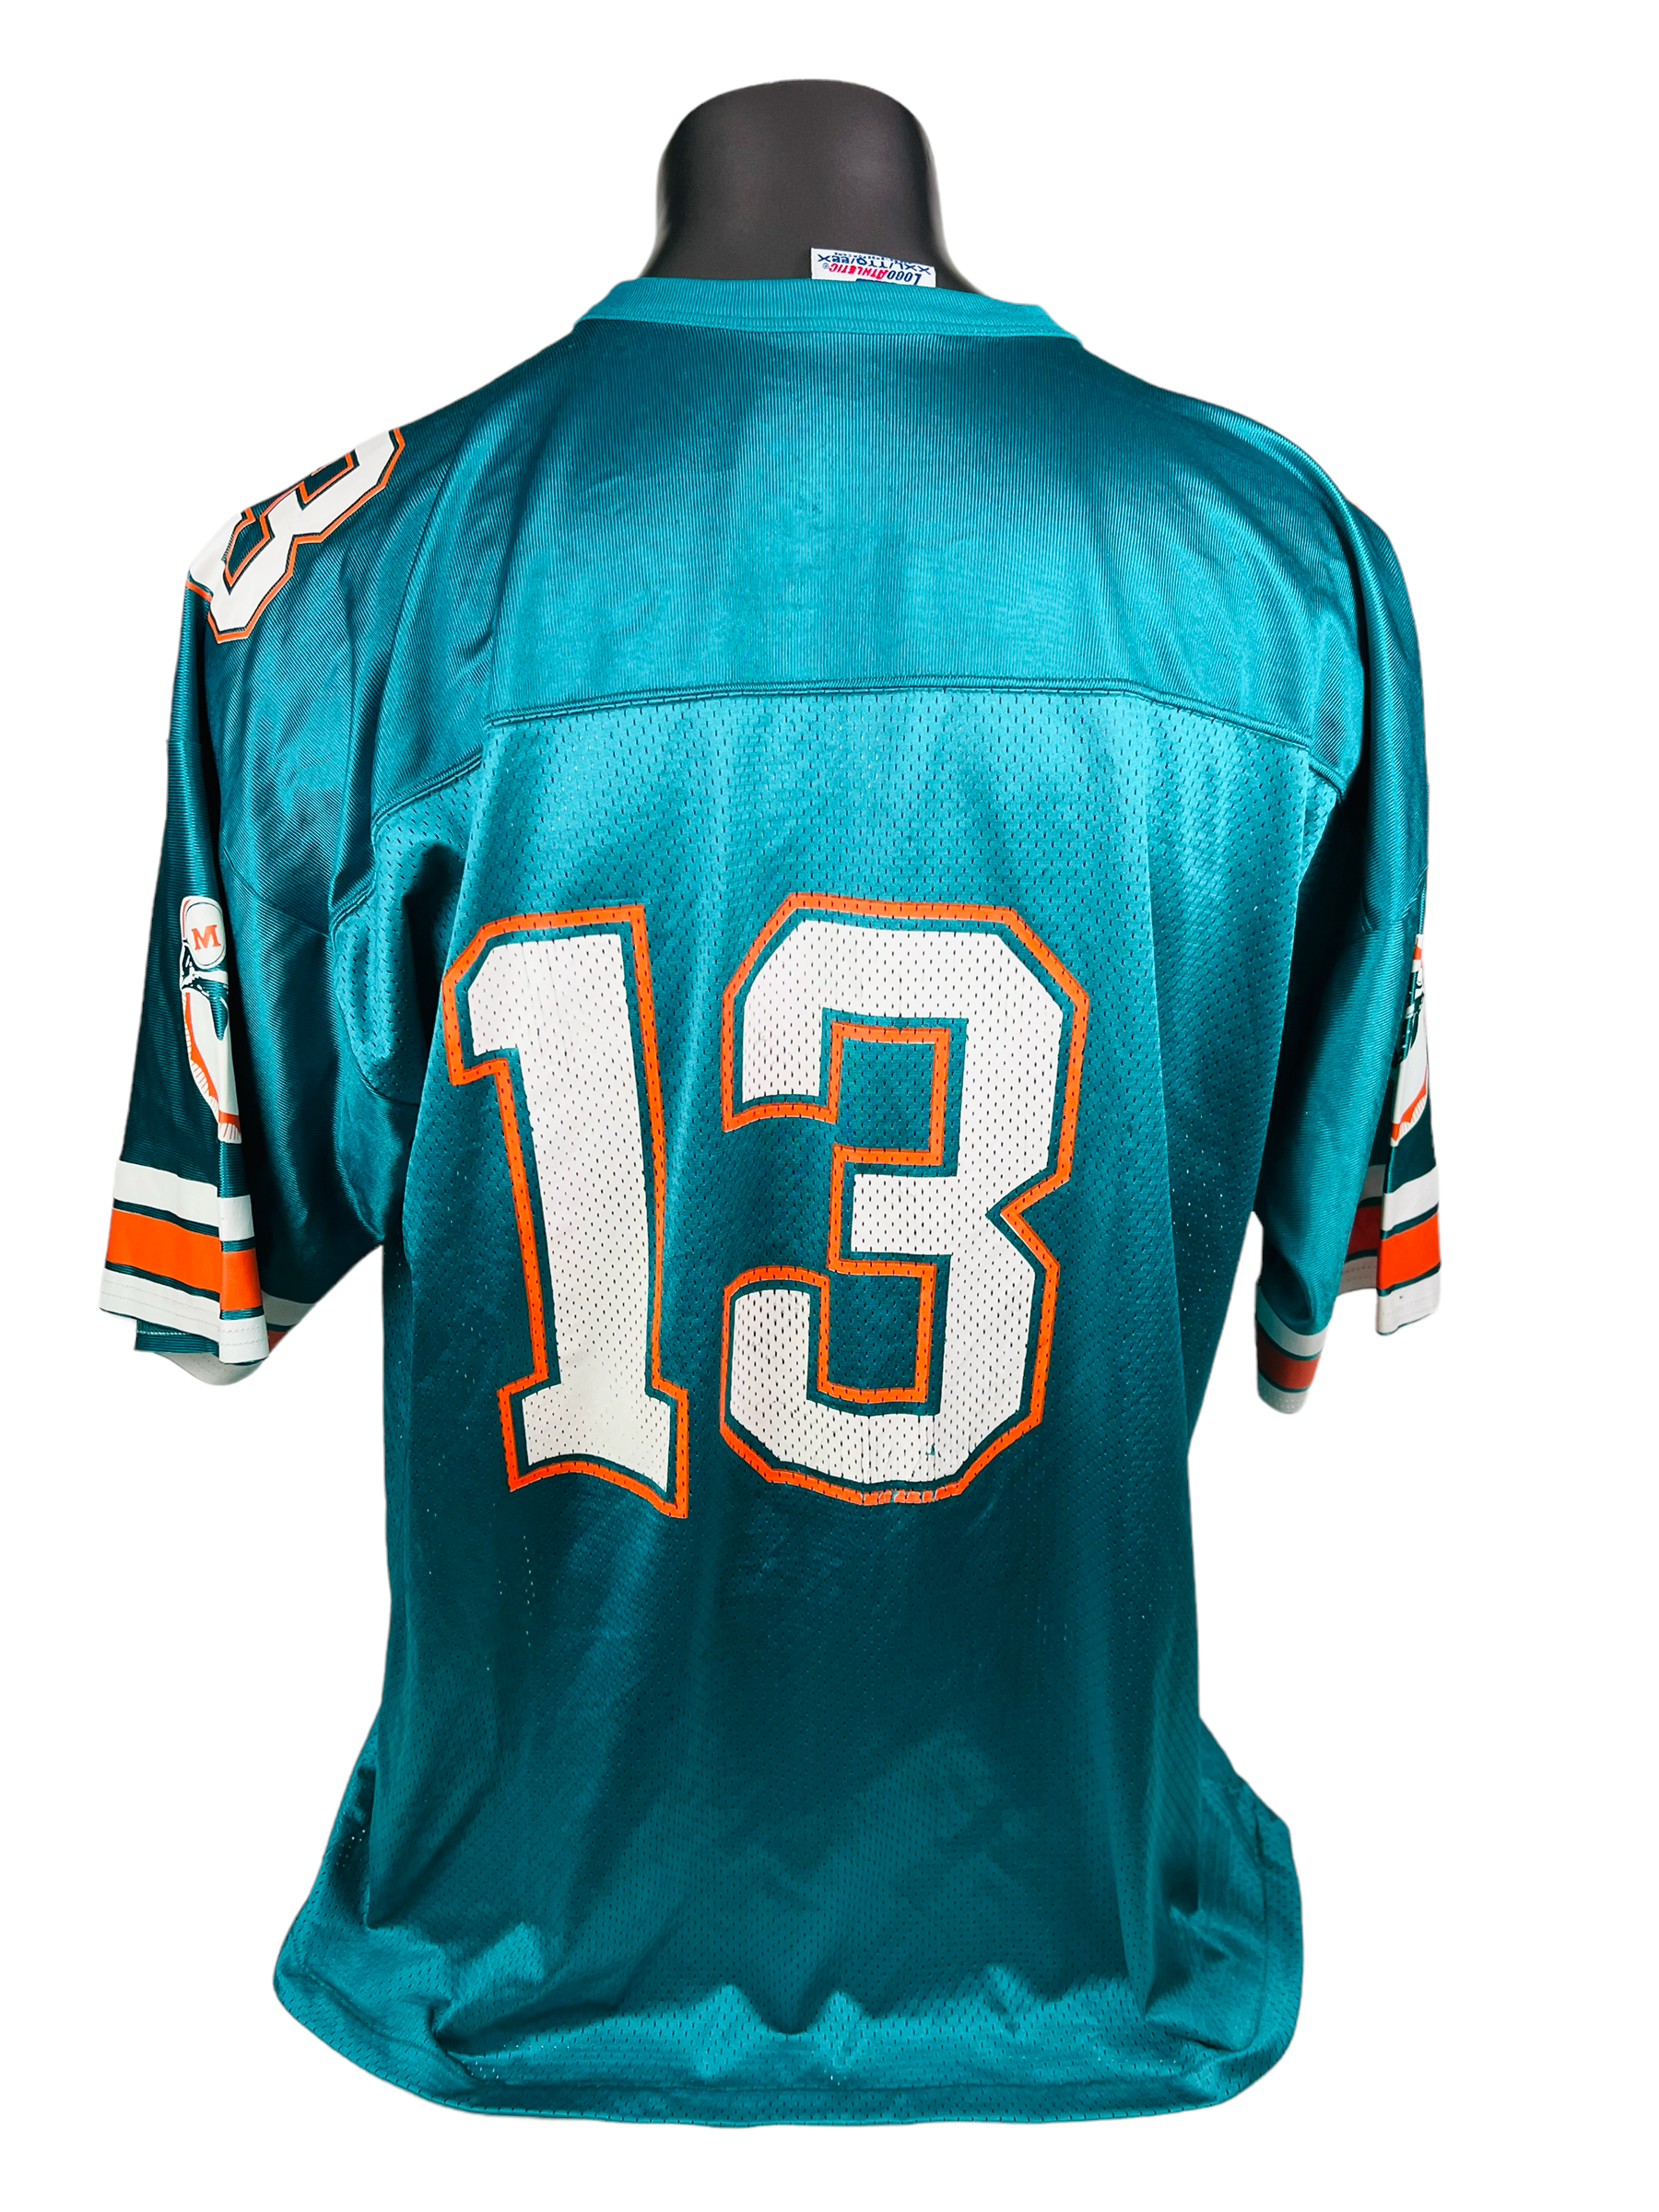 where to buy miami dolphins jersey